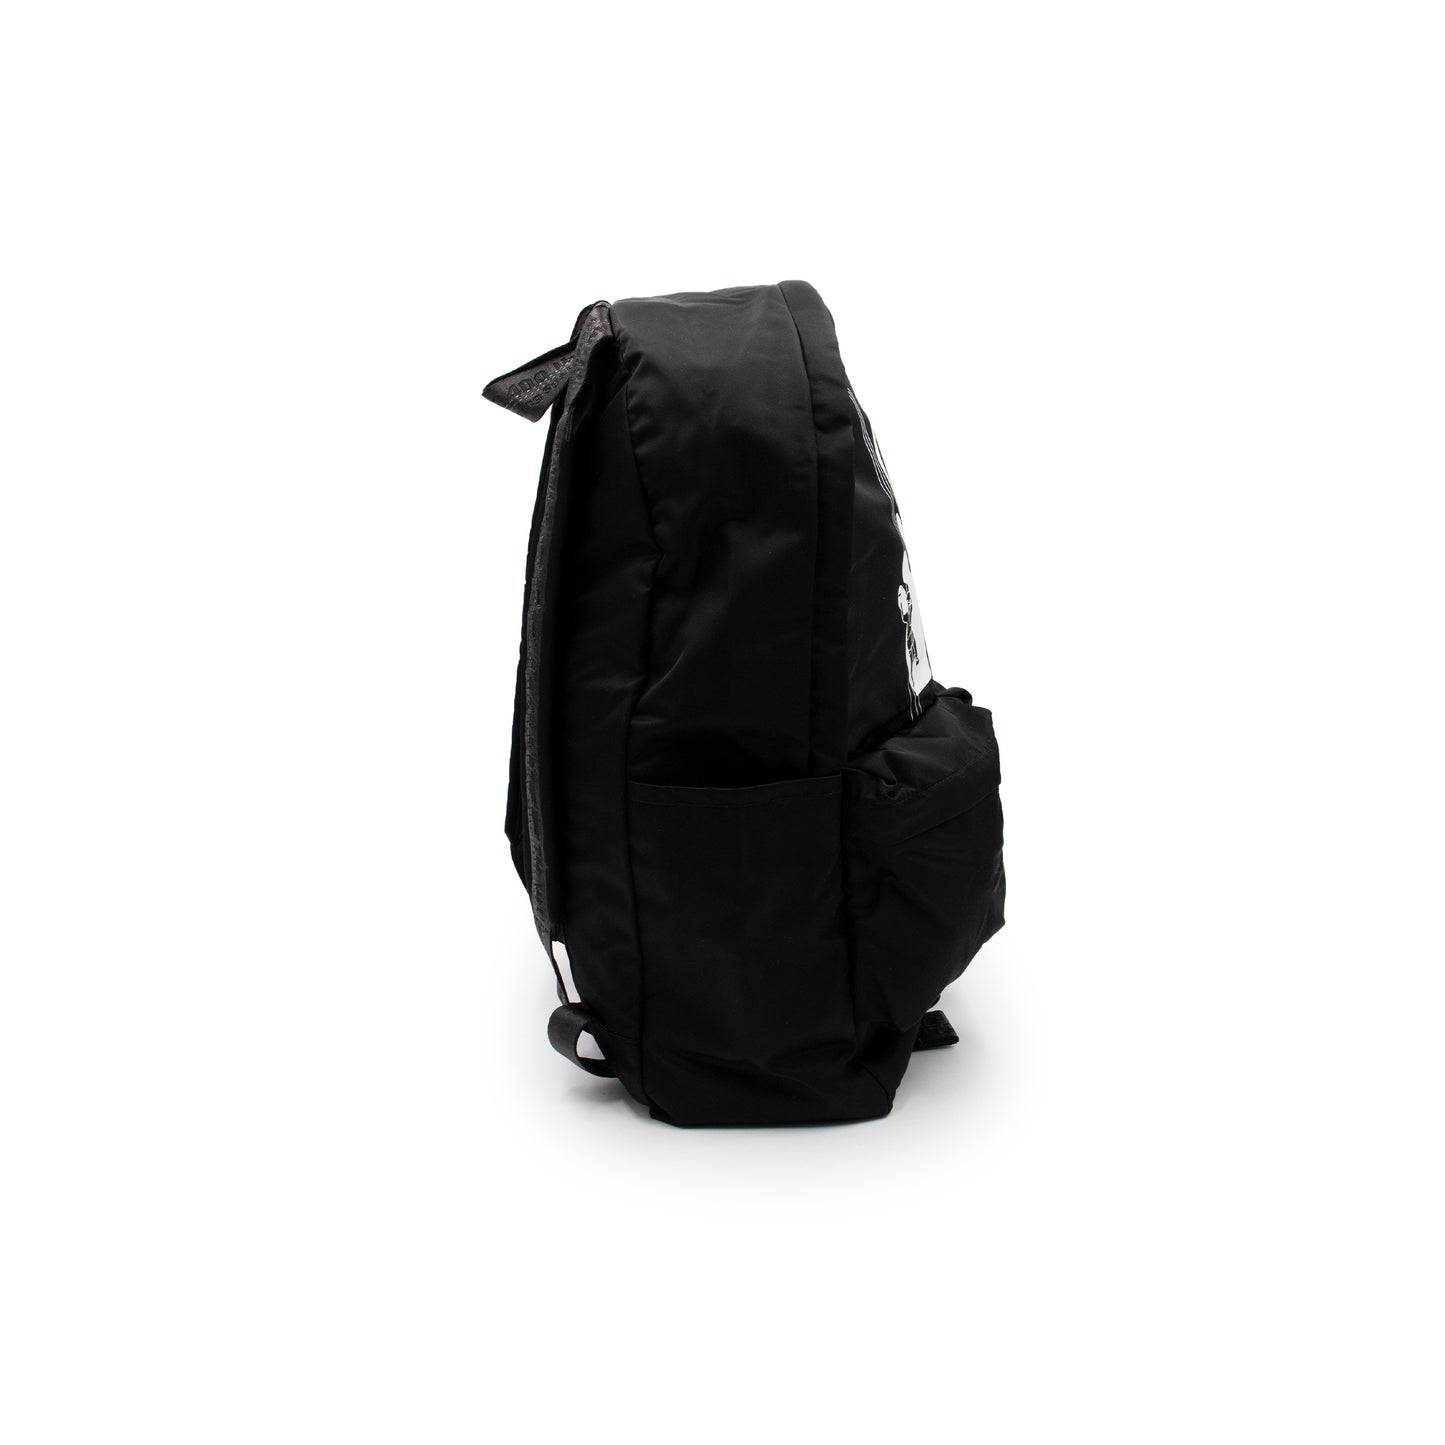 Hand Painting Backpack in Black/White